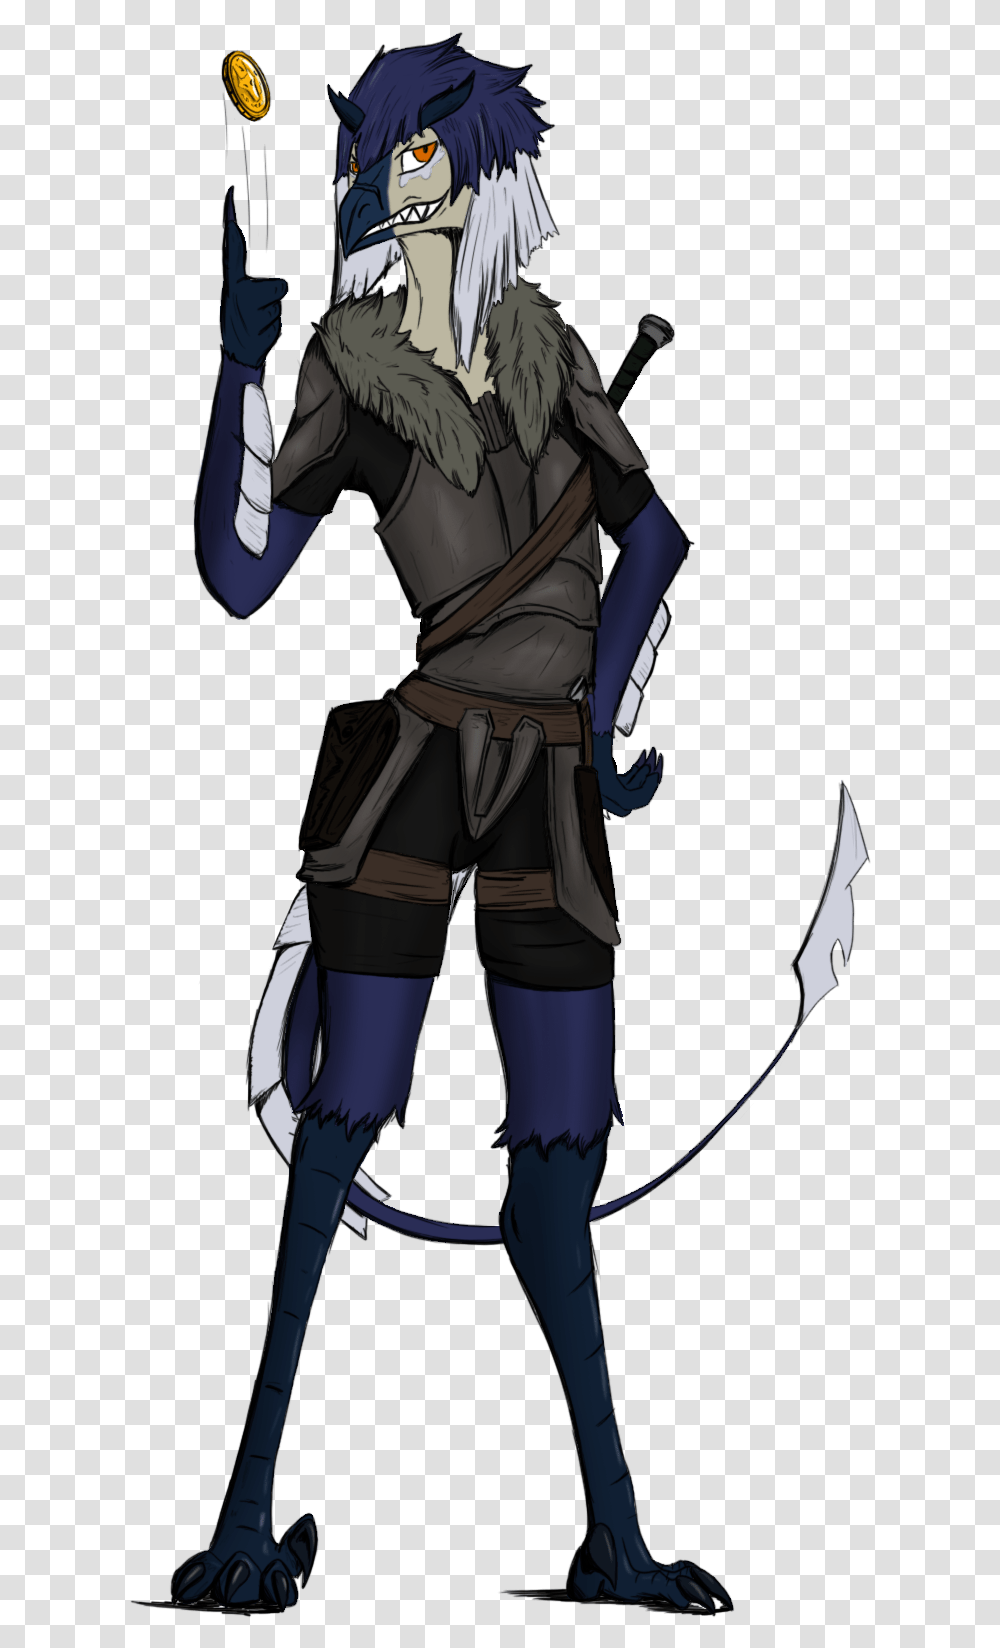 Malka The Bandit Hansel And Gretel Witch Hunters Concept Art, Person, Human, Ninja Transparent Png